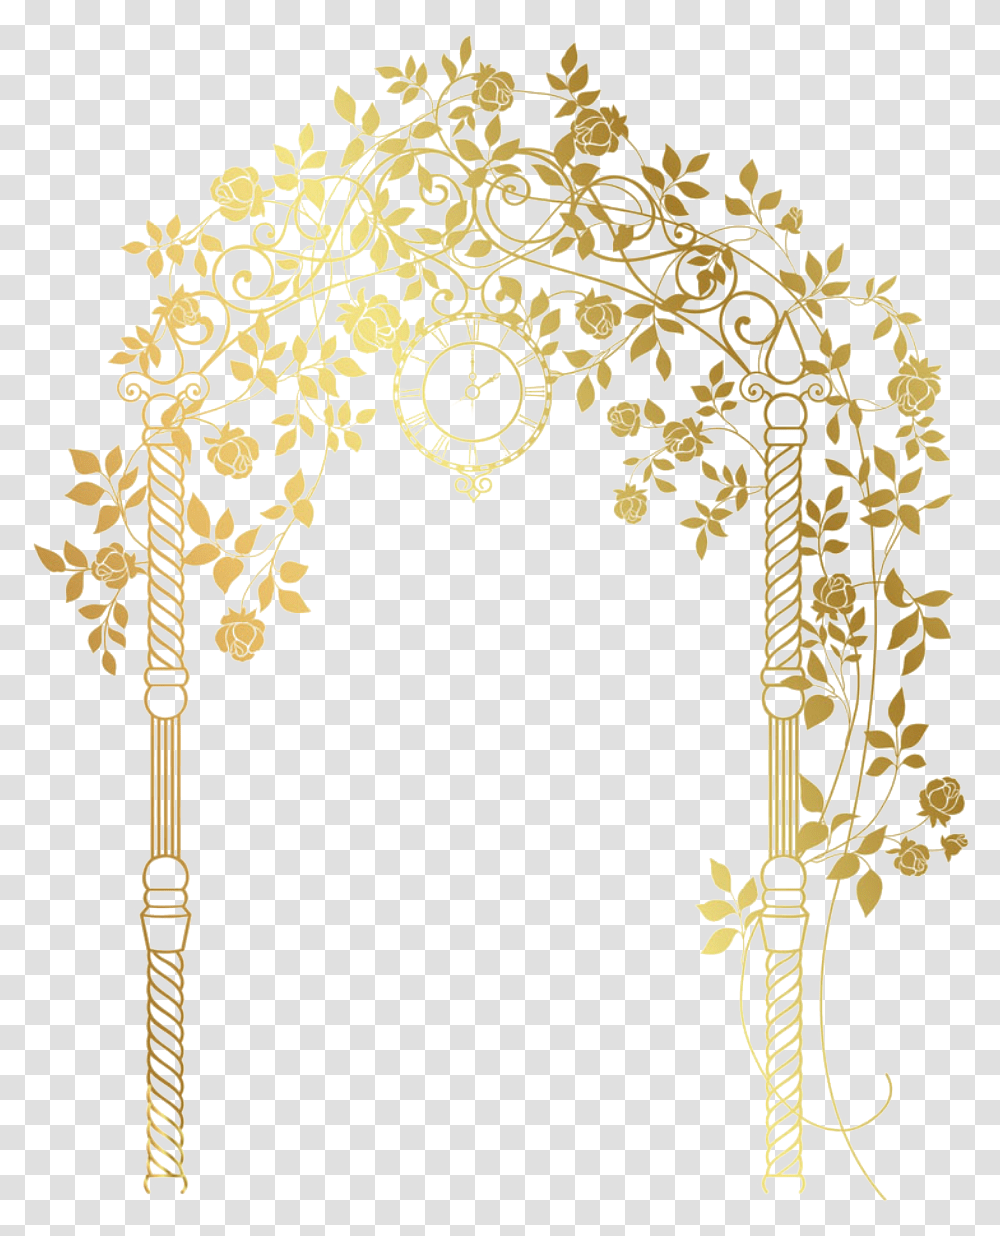 Https F Top4top Netp 580iokqk1 Snapchat Custom Silhouette Wedding Arch, Chandelier, Lamp, Pattern, Gold Transparent Png